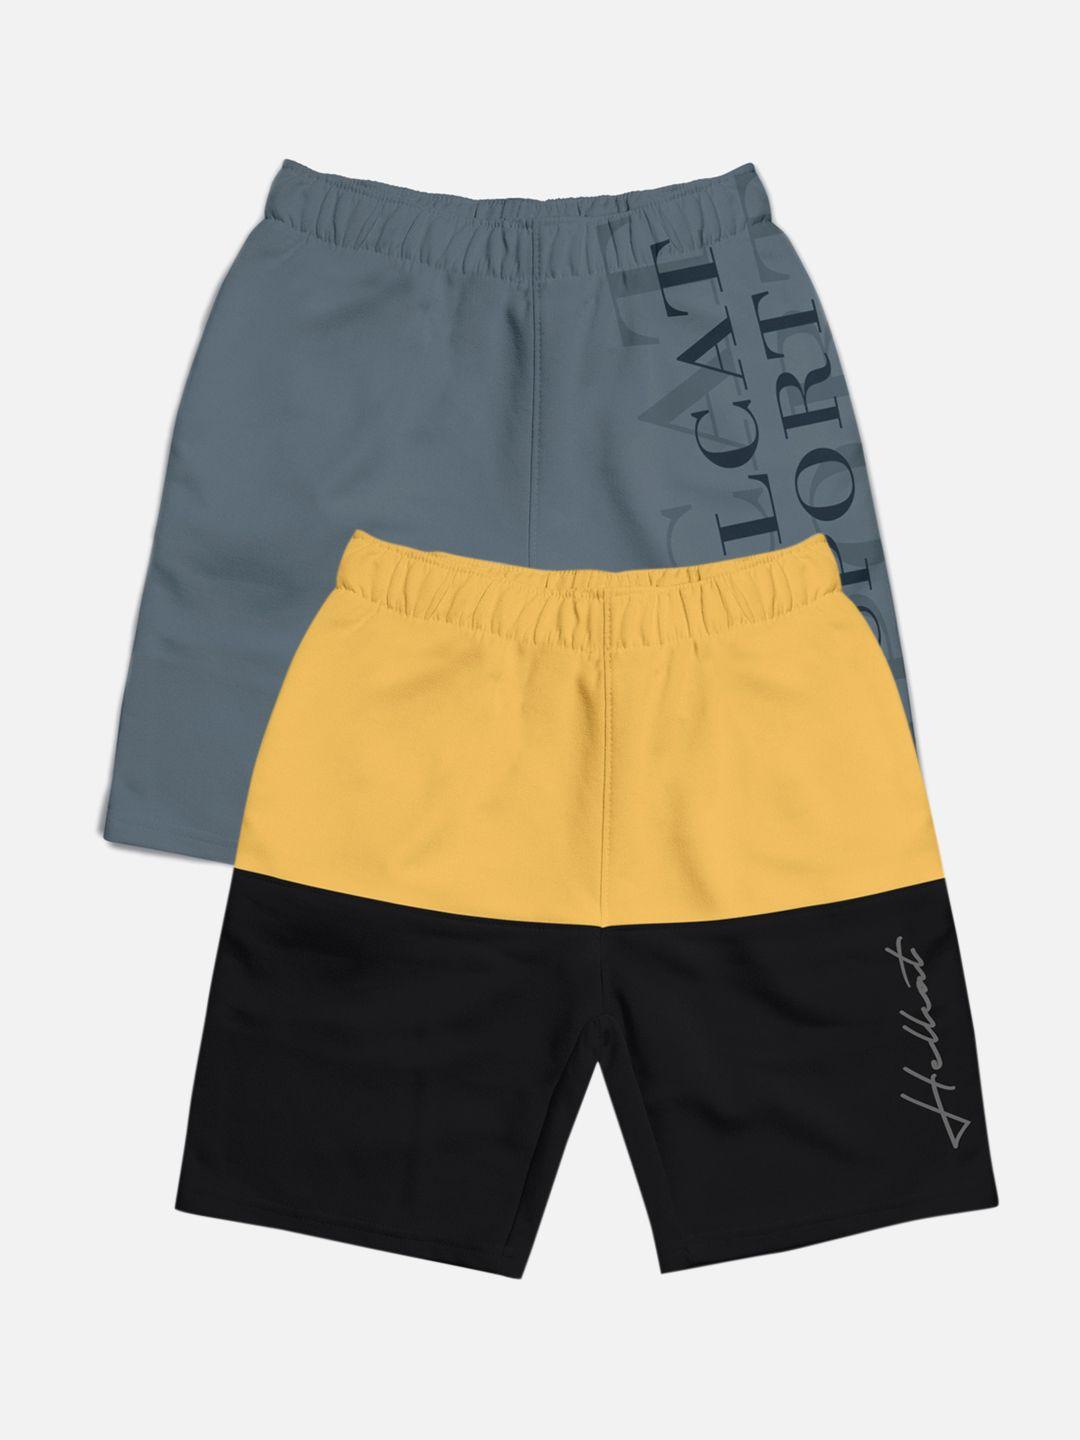 hellcat-boys-pack-of-2-typography-printed-mid-rise-cotton-shorts